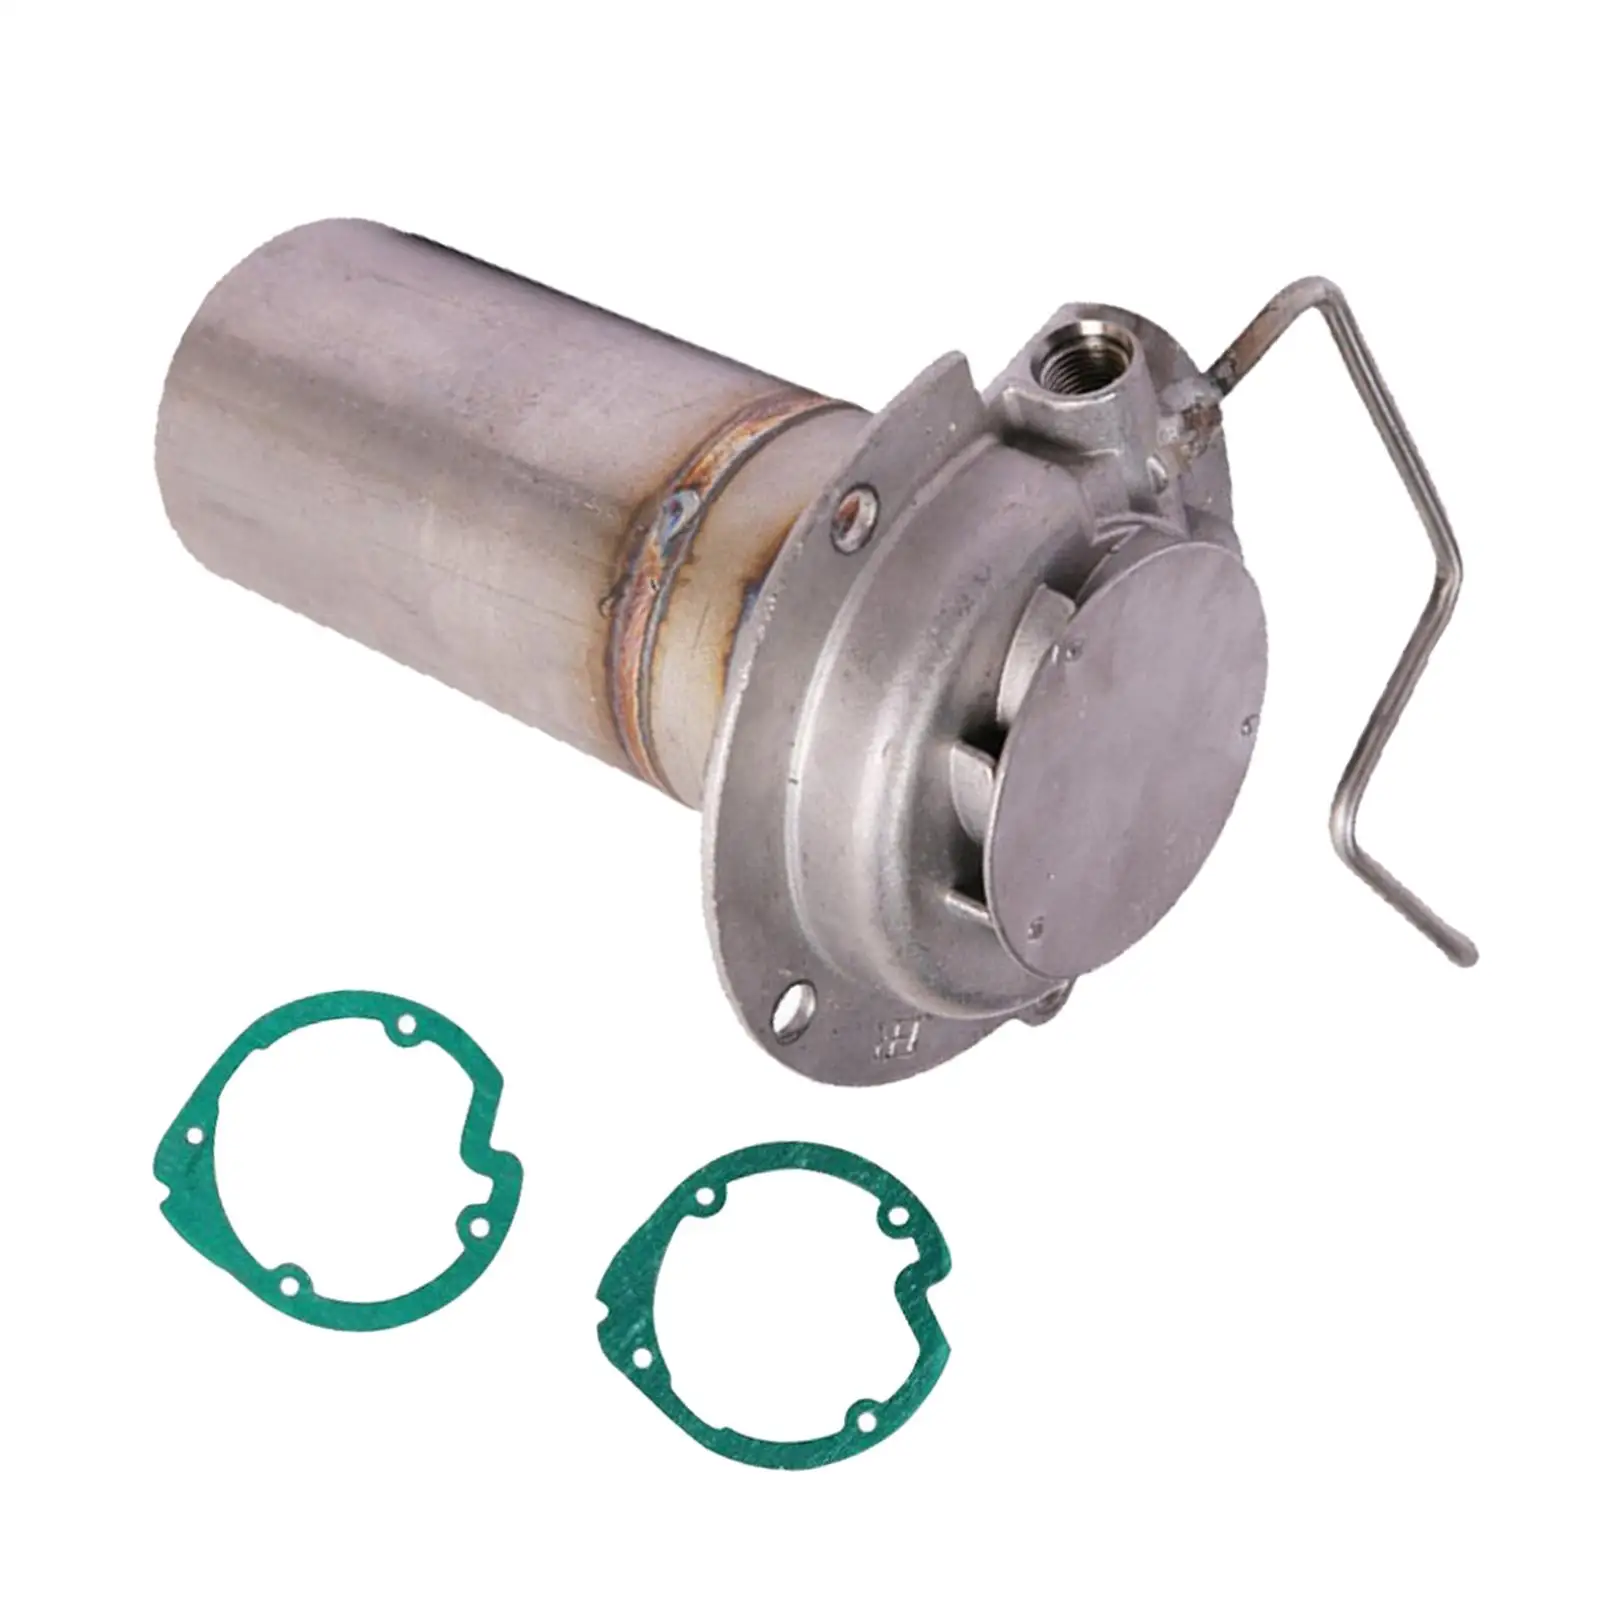 Automotive Combustion Chamber Easily Install Stainless Steel Accessory with Gaskets Combustion Cylinder for Parking Heater